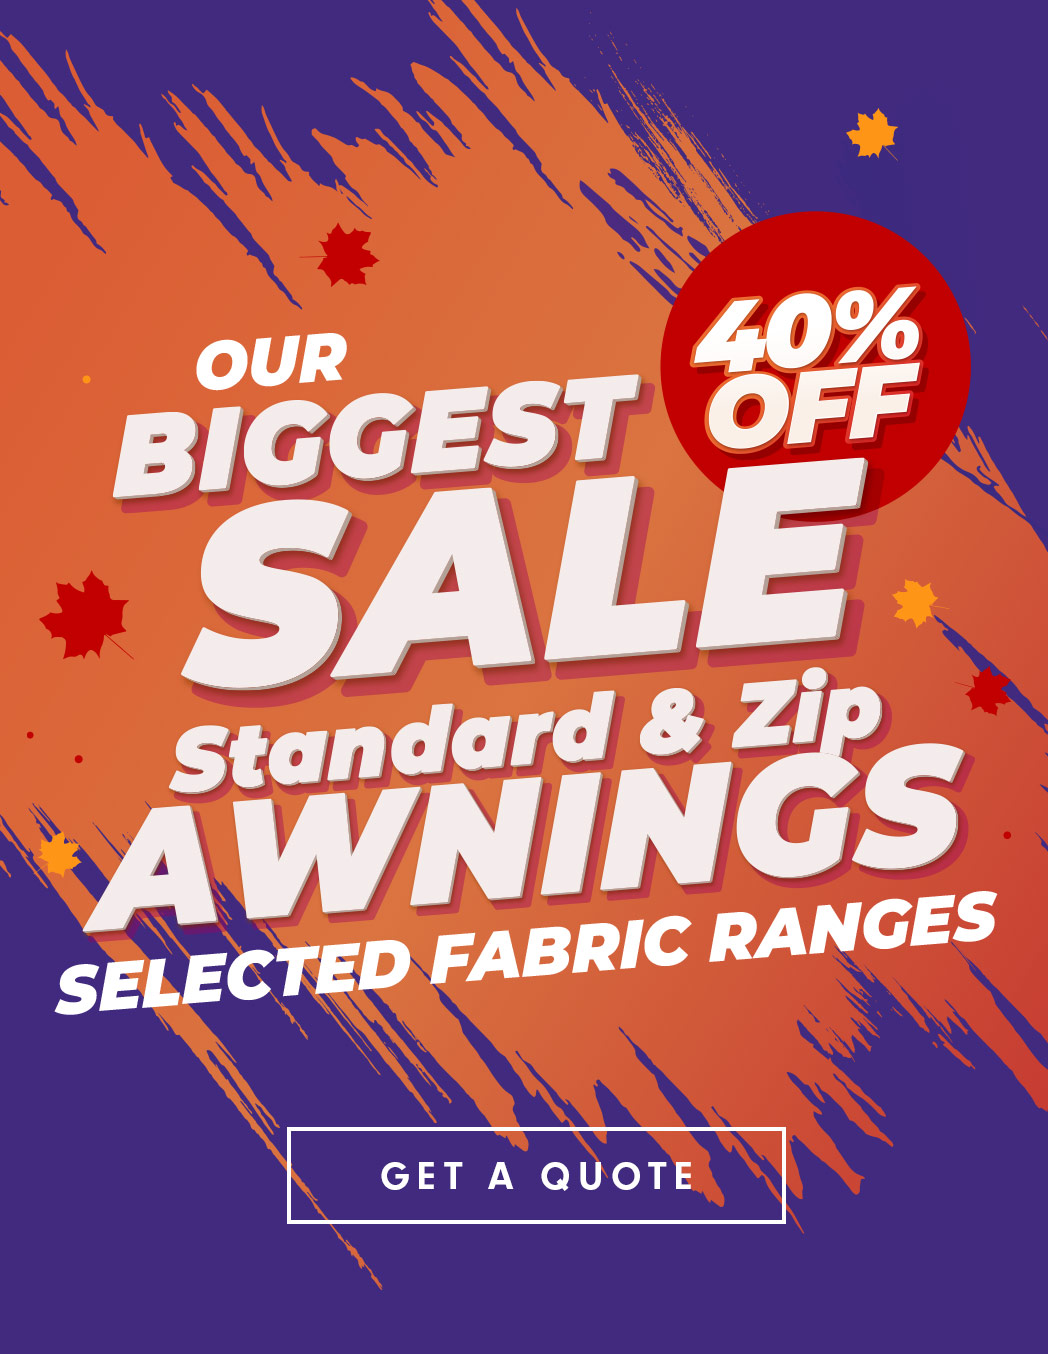 Biggest Sale Standard & Zip Awnings in Melbourne